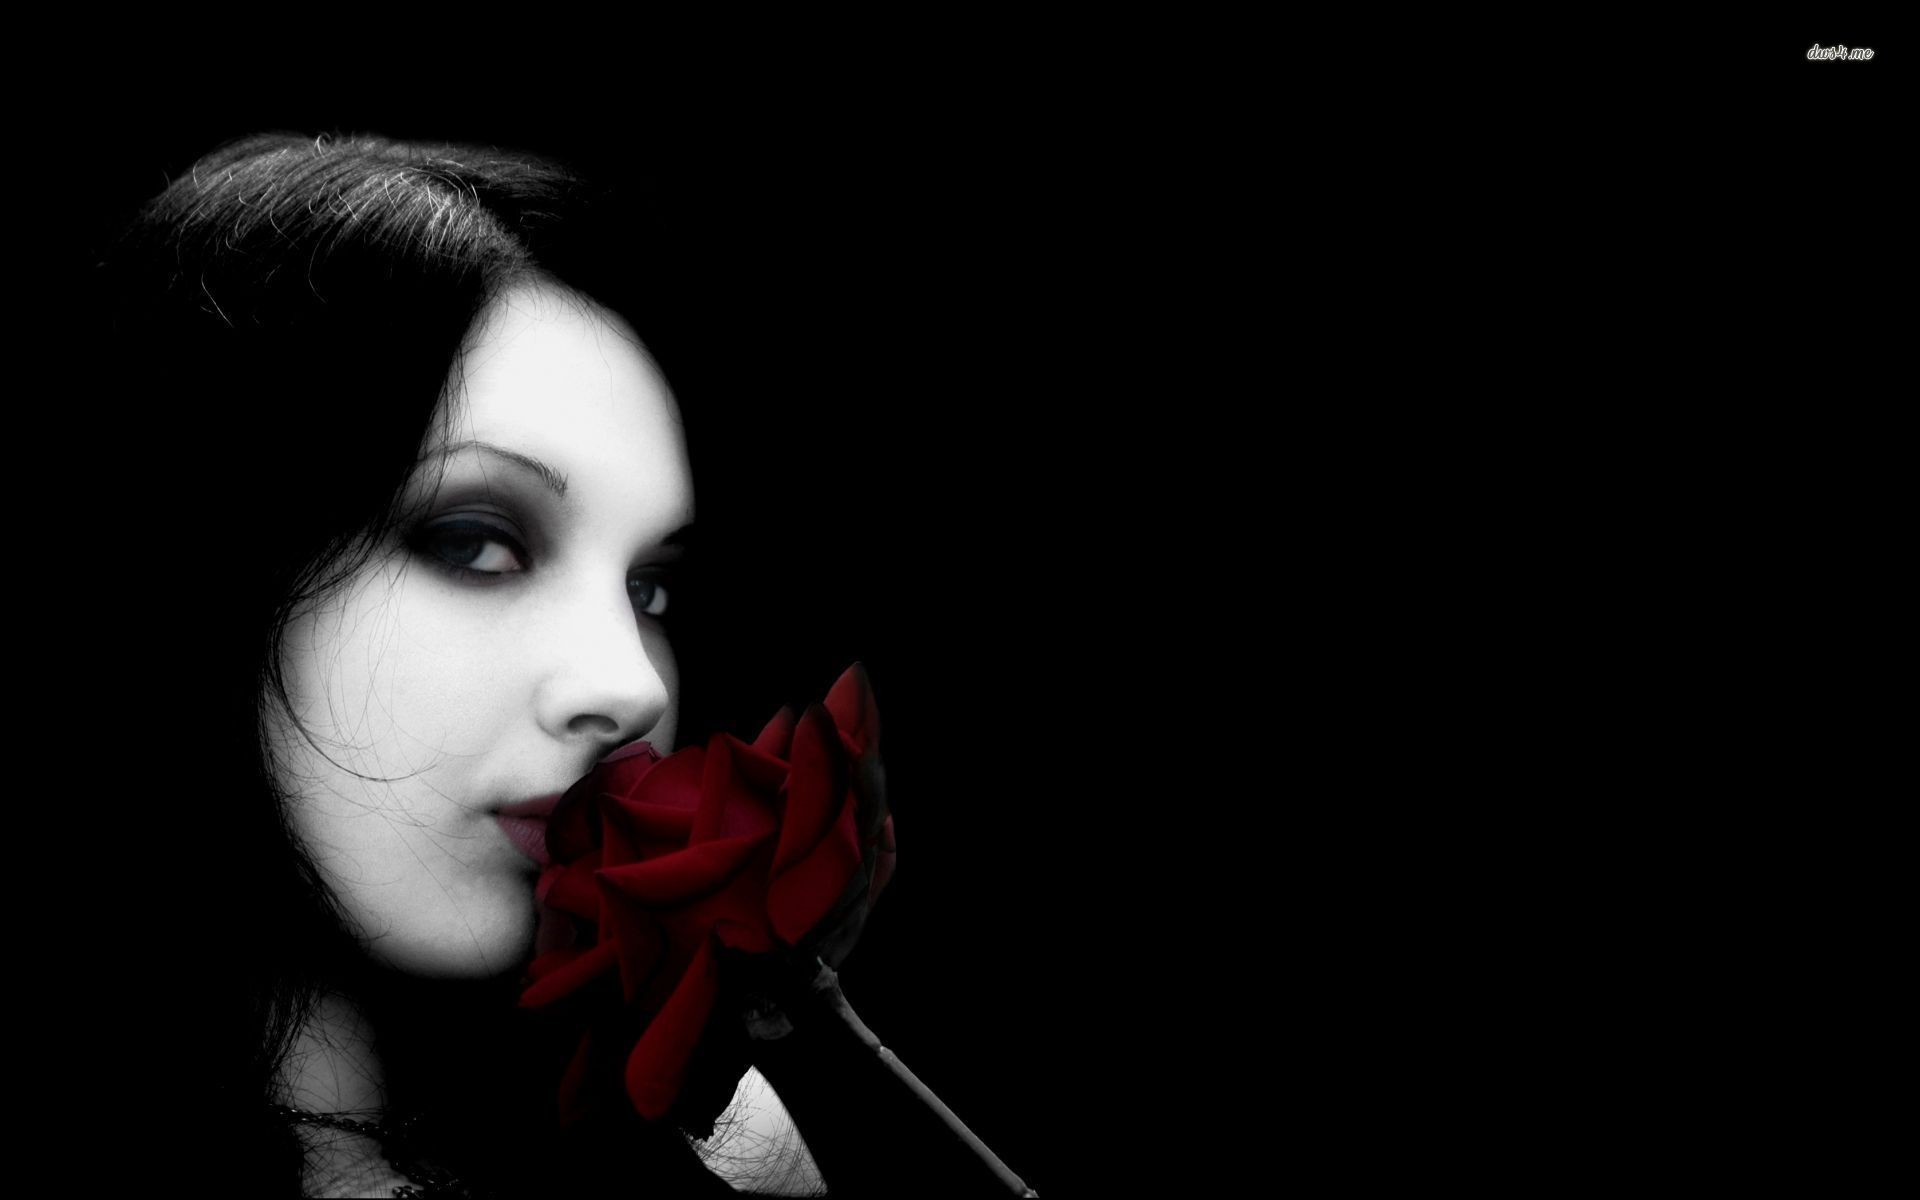 Goth girl with a red rose wallpaper – Digital Art wallpapers – #17835